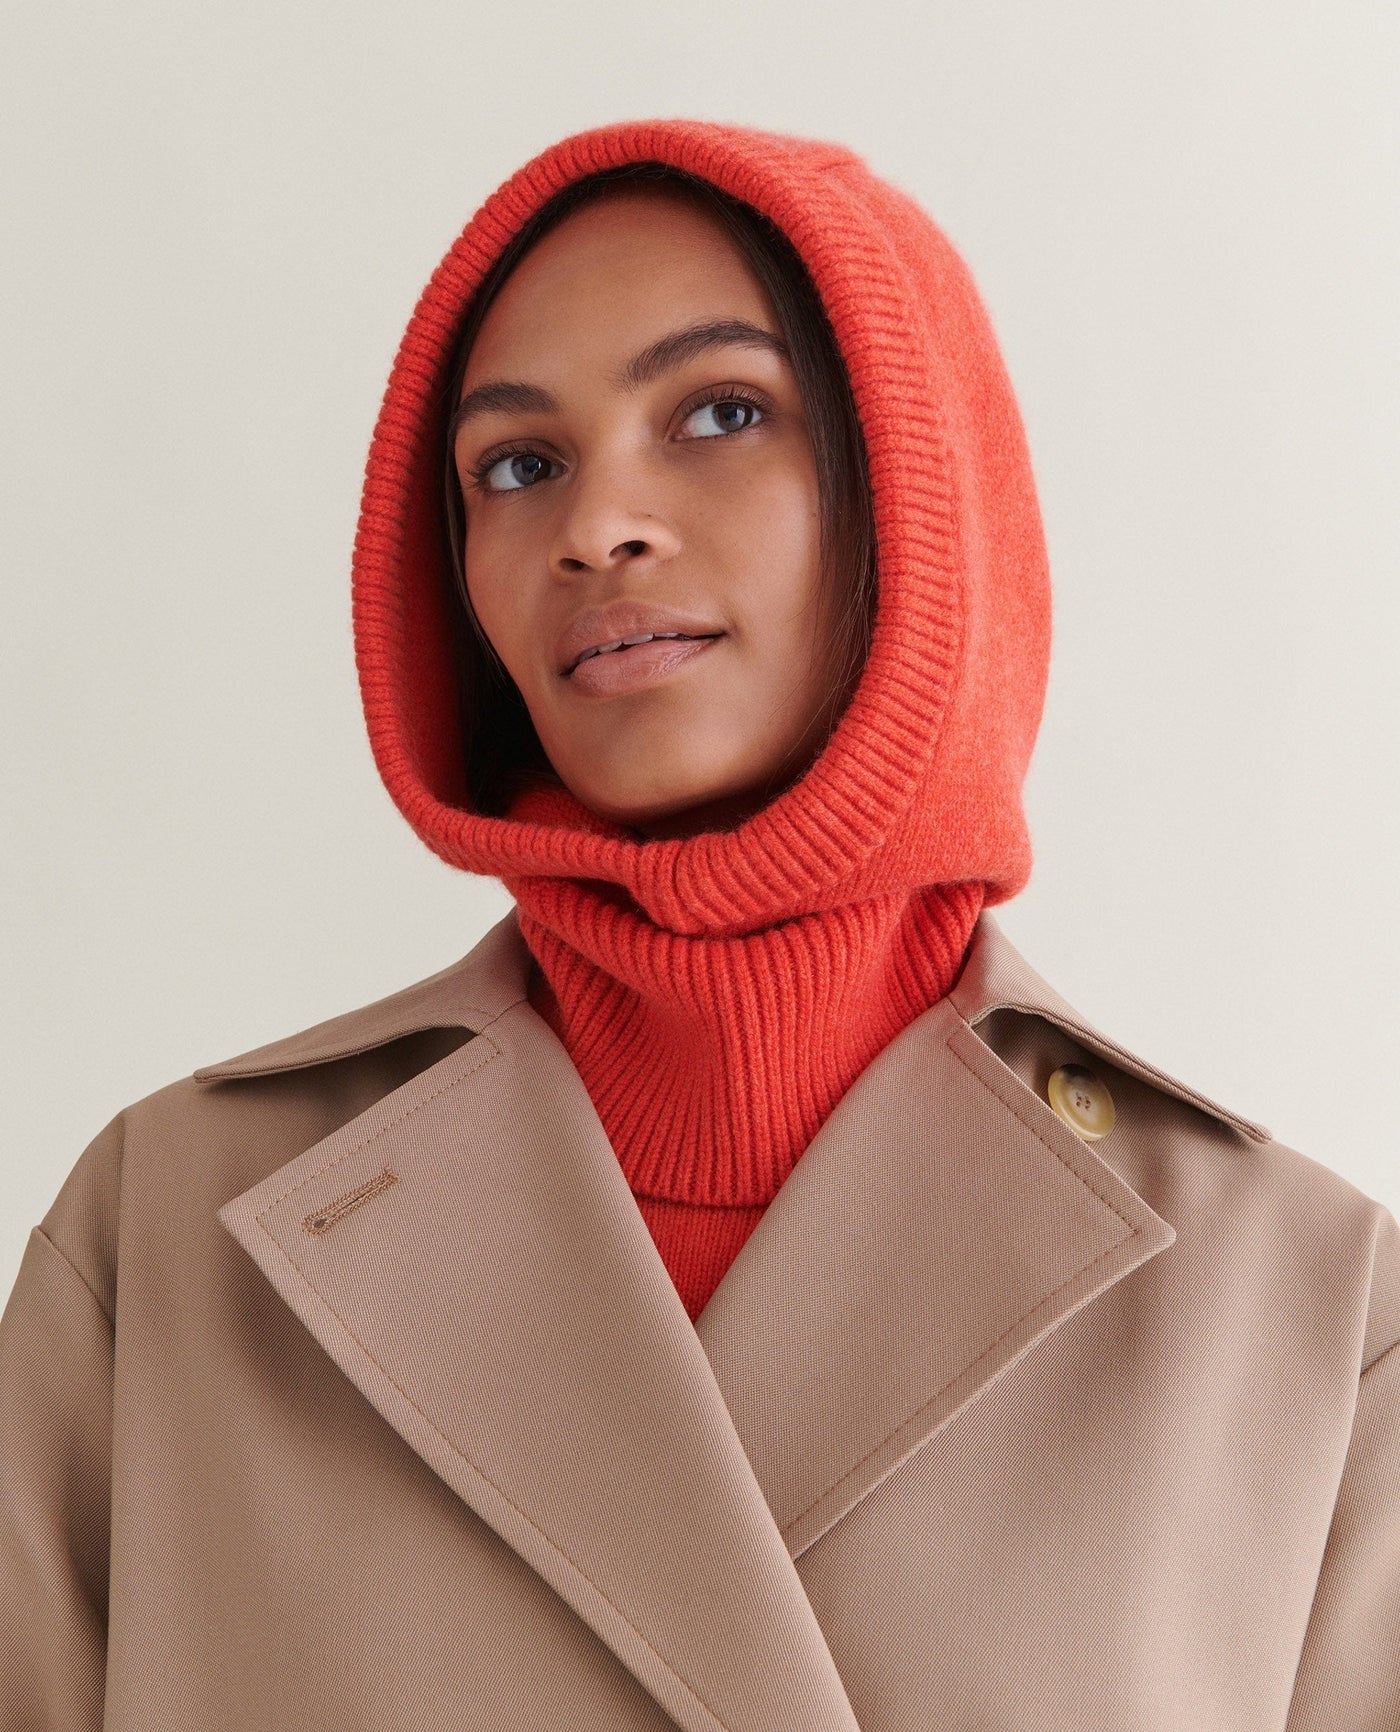 The Knitted Hood Trend Is Firmly on the Up—Shop It Here | Who What Wear